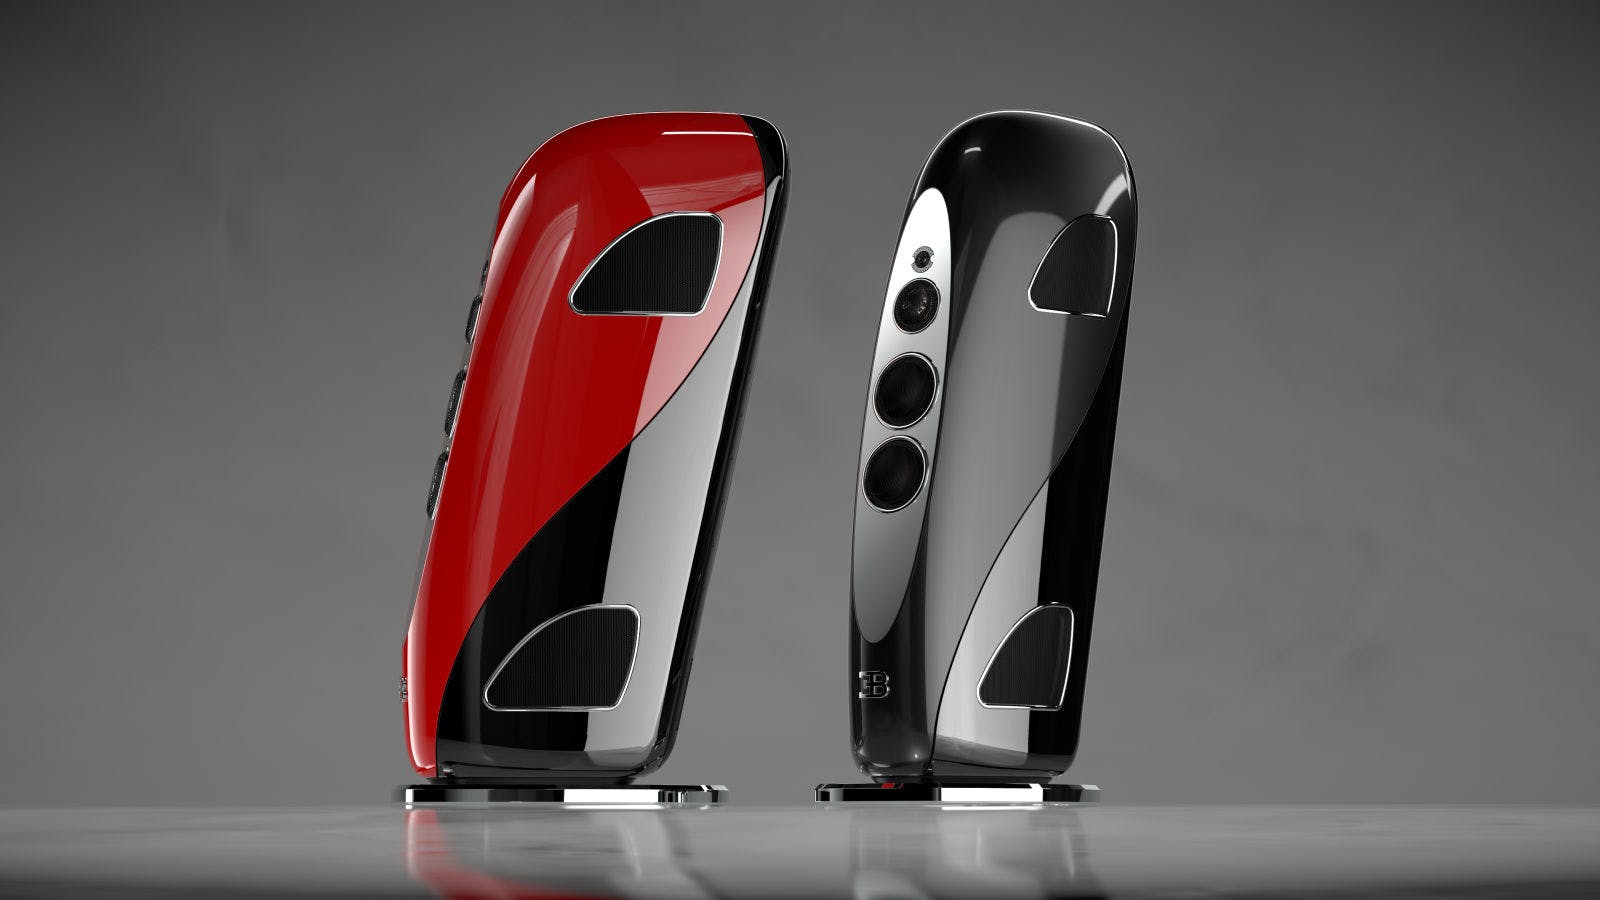 There are two main themes in the design: Monocoque and Duotone; in the picture: the Royale Duotone" speaker series."